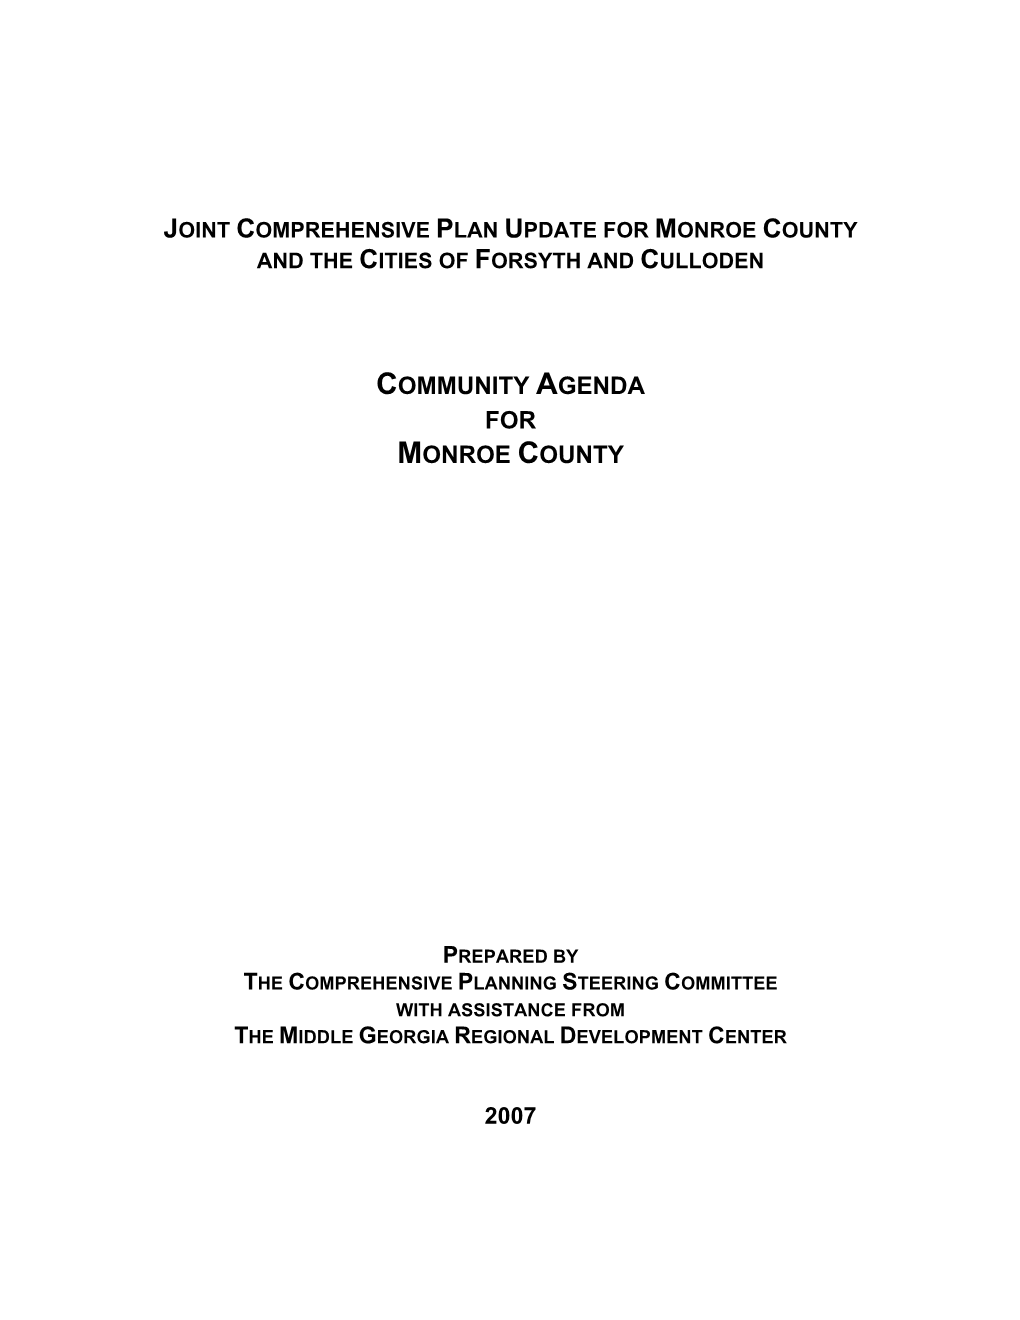 Joint Comprehensive Plan Update for Monroe County and the Cities of Forsyth and Culloden